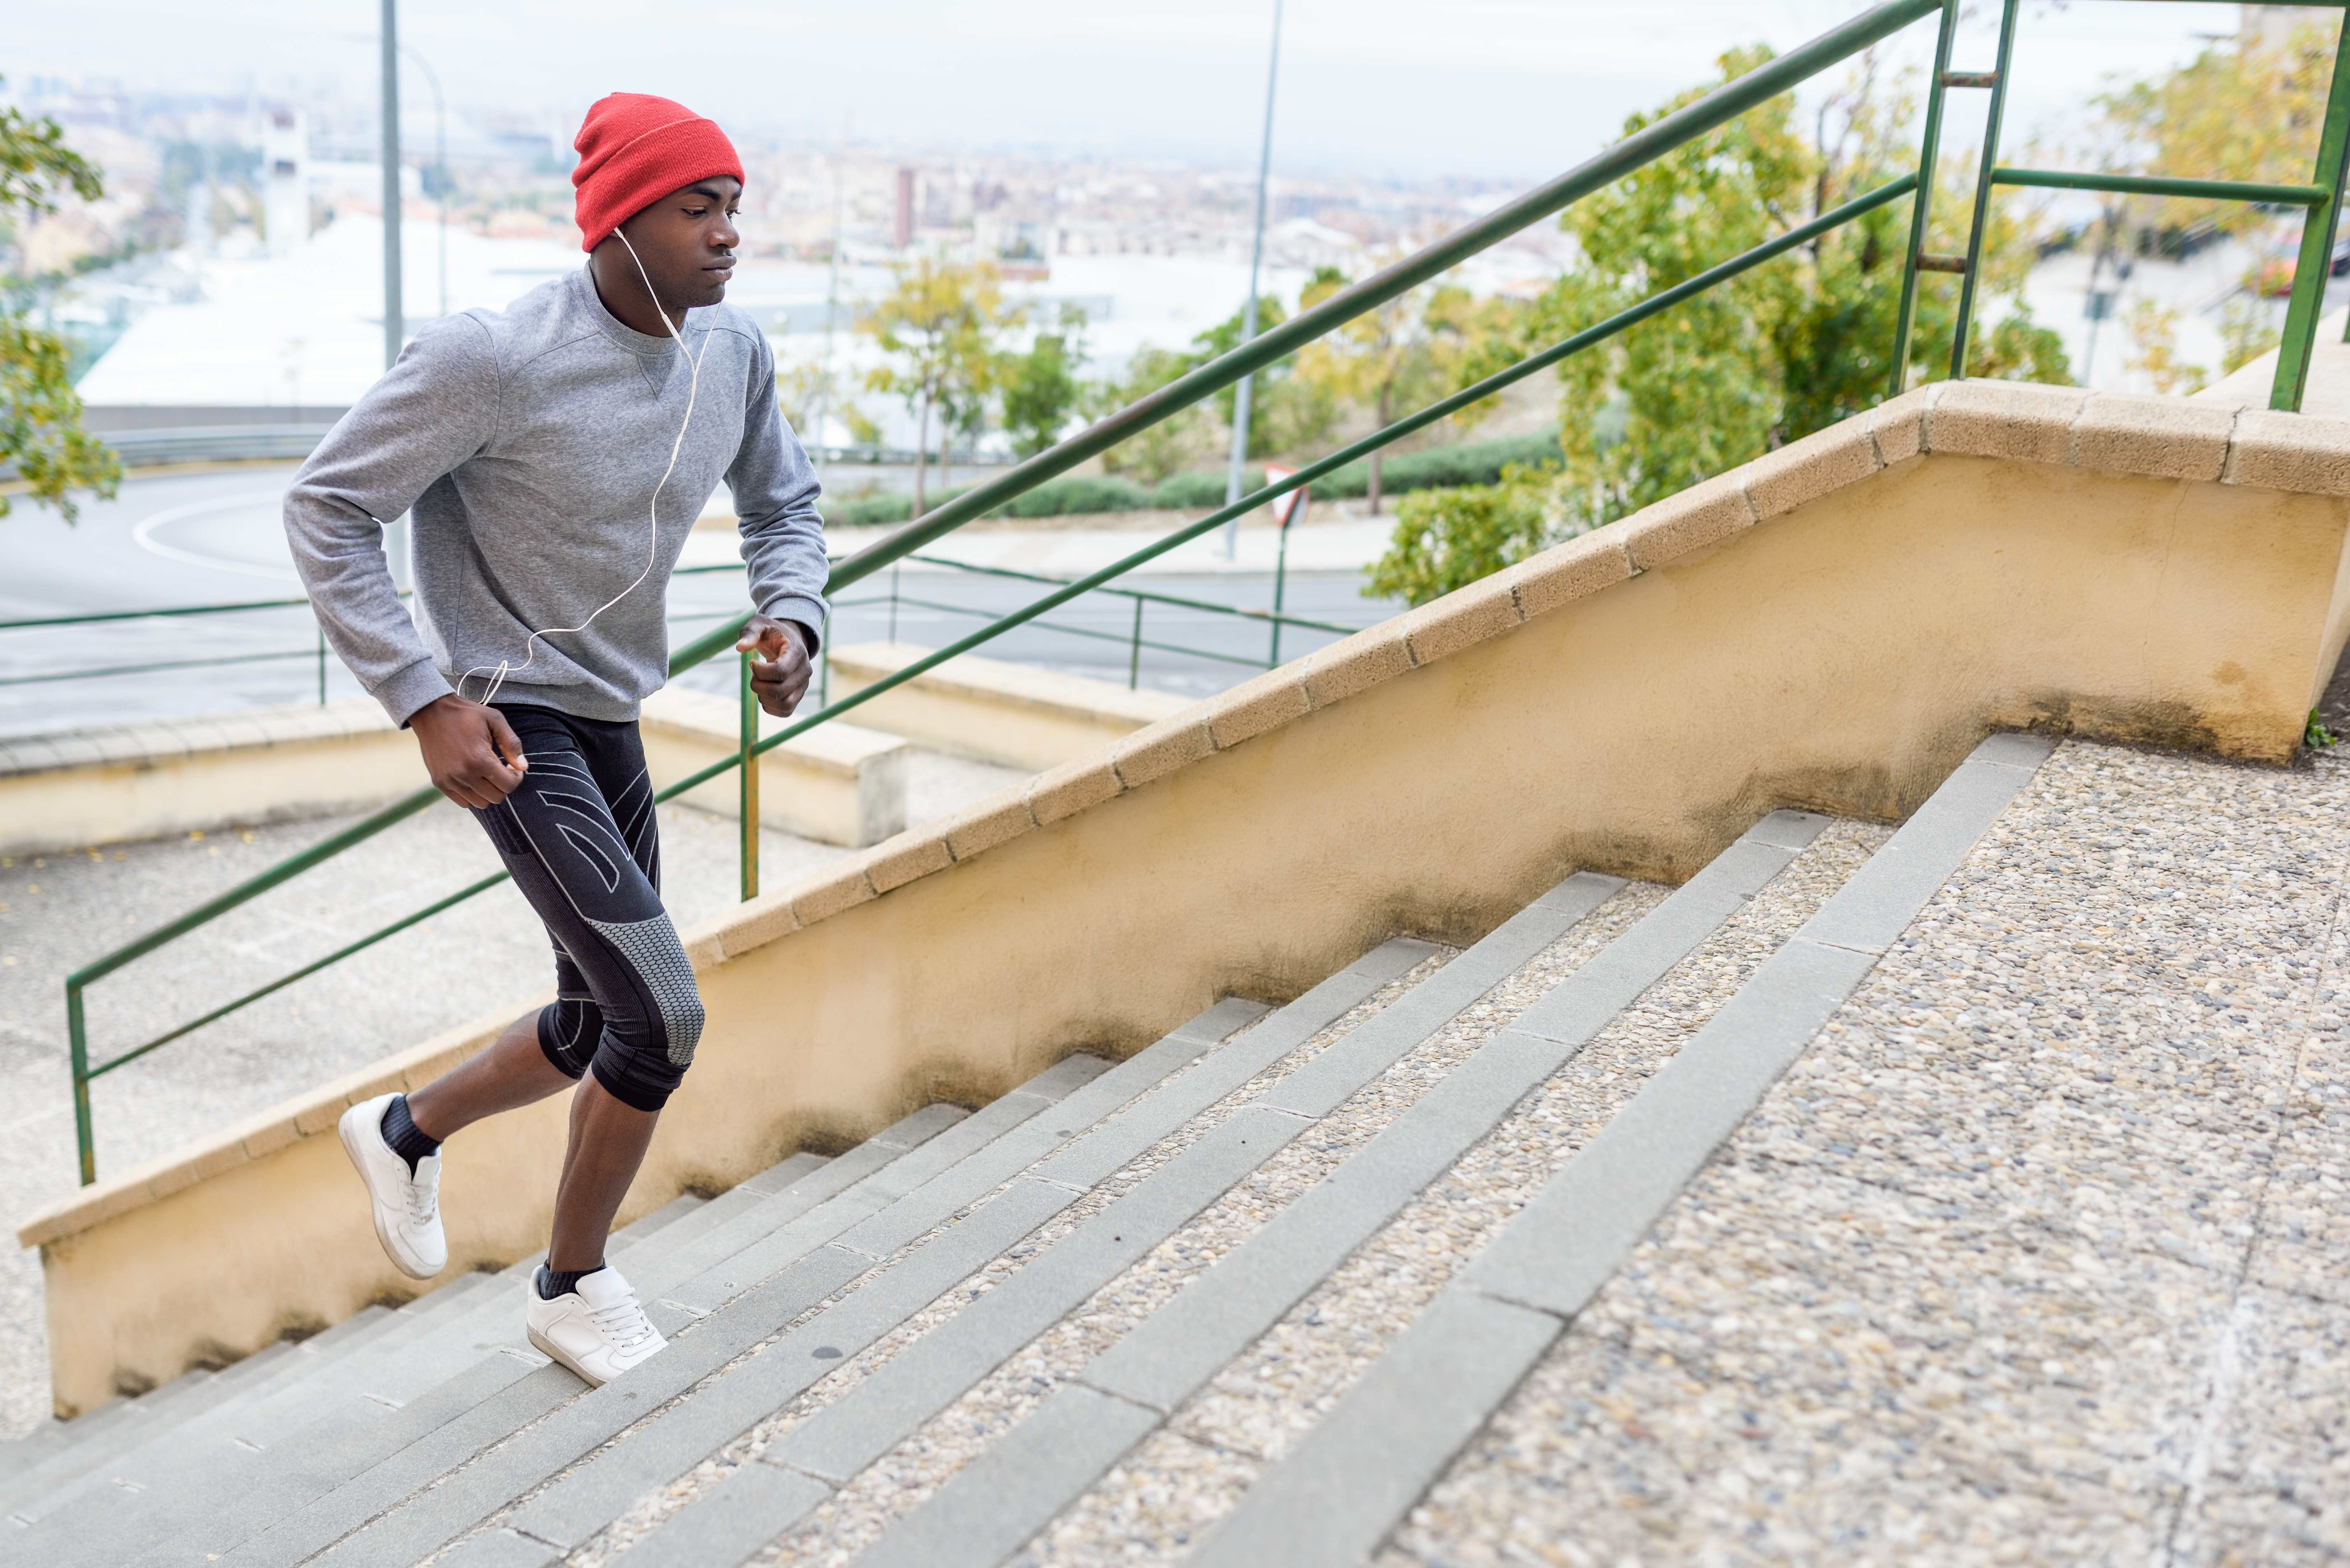 This Stair Workout Is a Great Cardio Routine That You Can Do at